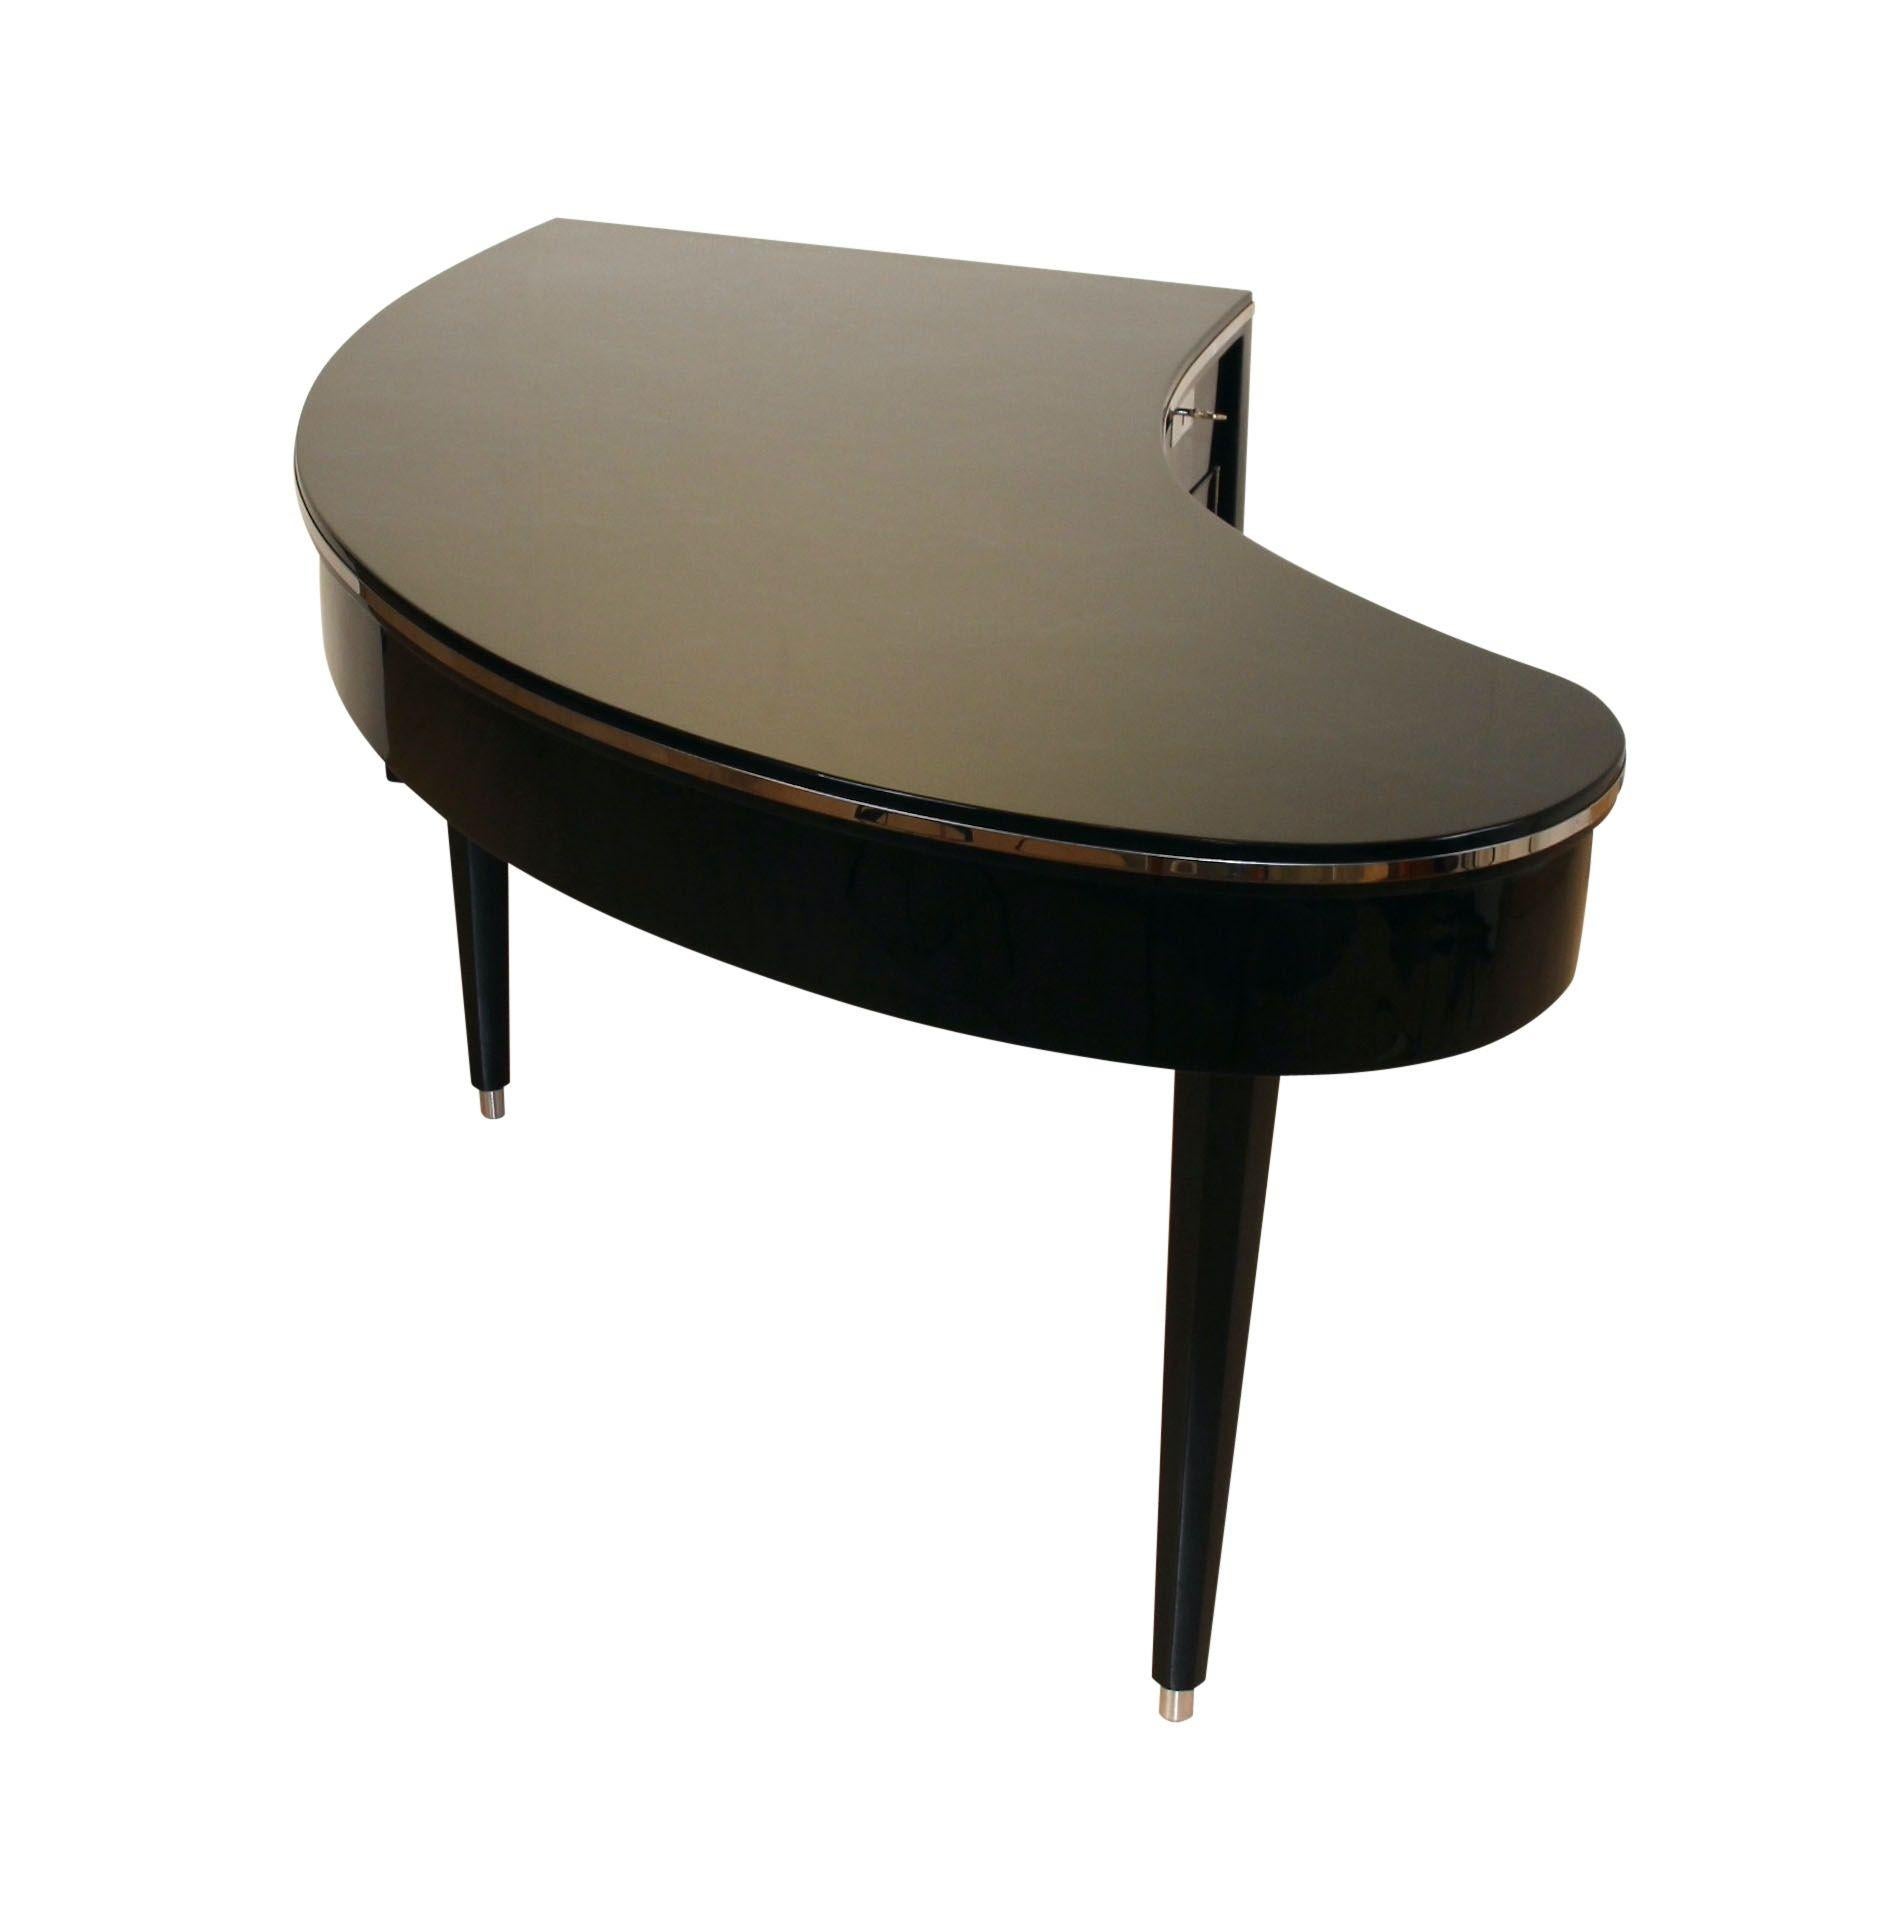 French Design Desk, Curved Top, Piano Lacquer, Chrome, France, 1950s For Sale